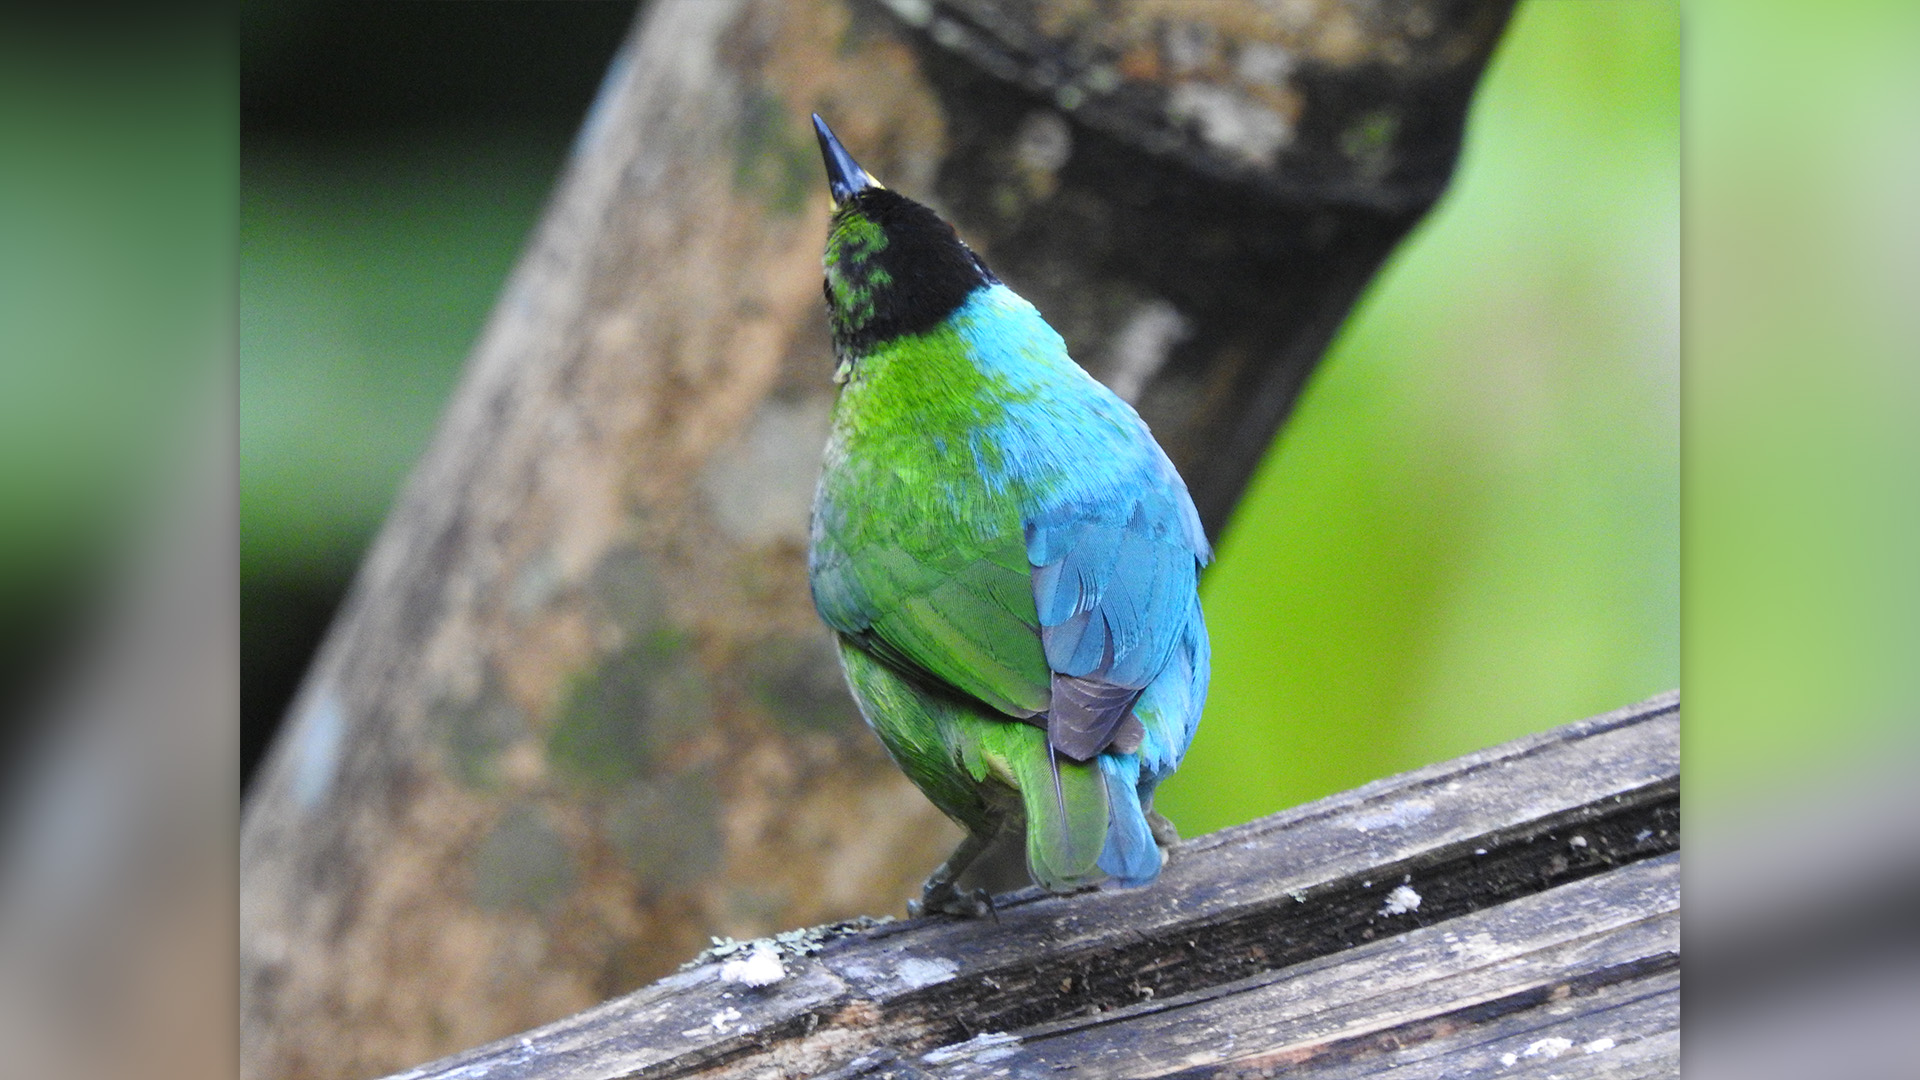 The green honeycreeper as viewed from the back, with green feathers on its left side and blue on its right